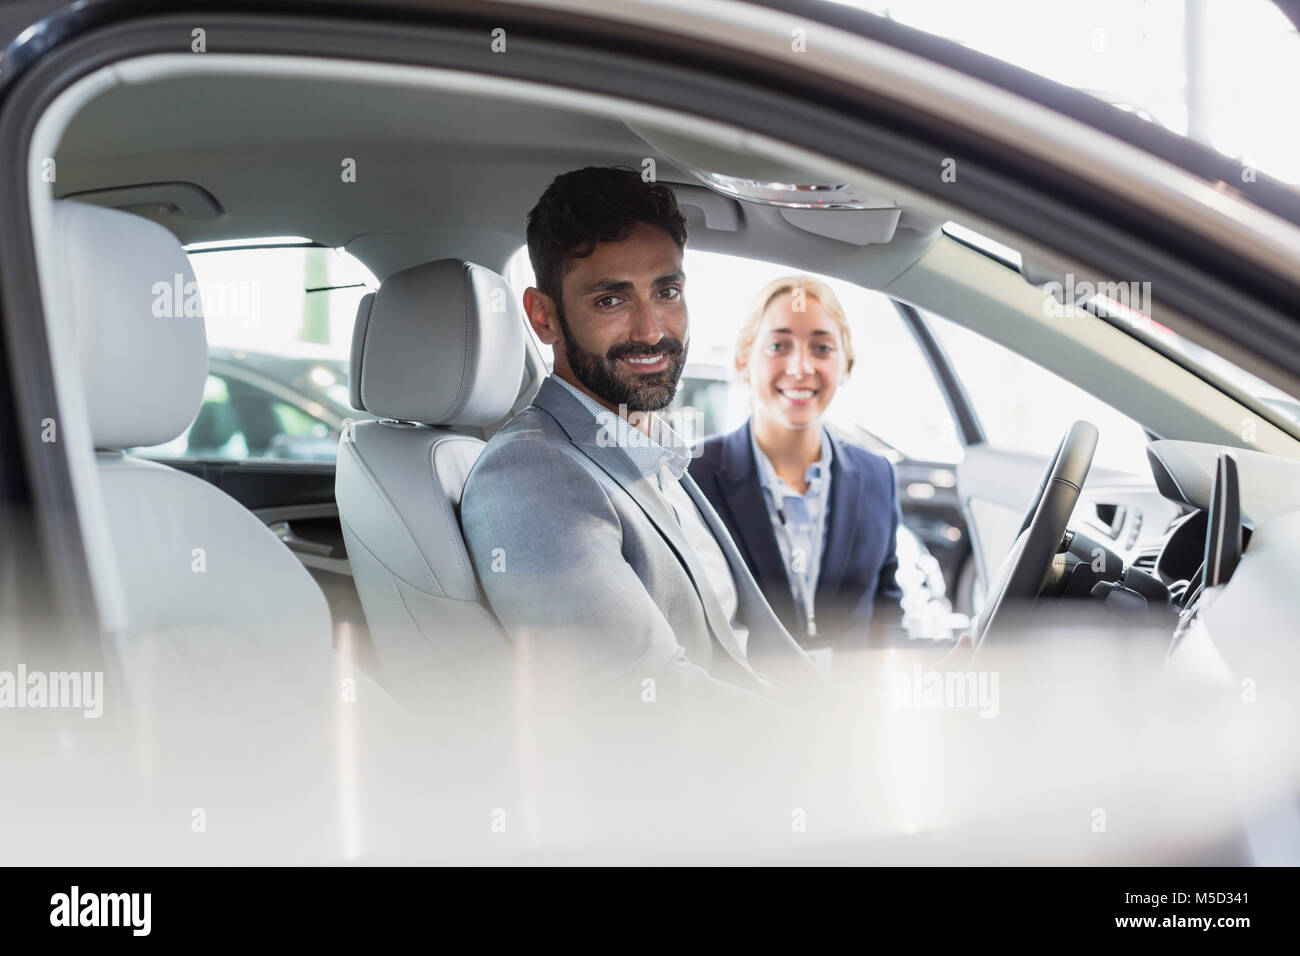 Portrait smiling, confident car saleswoman and male customer in driver’s set of new car in car dealership Stock Photo